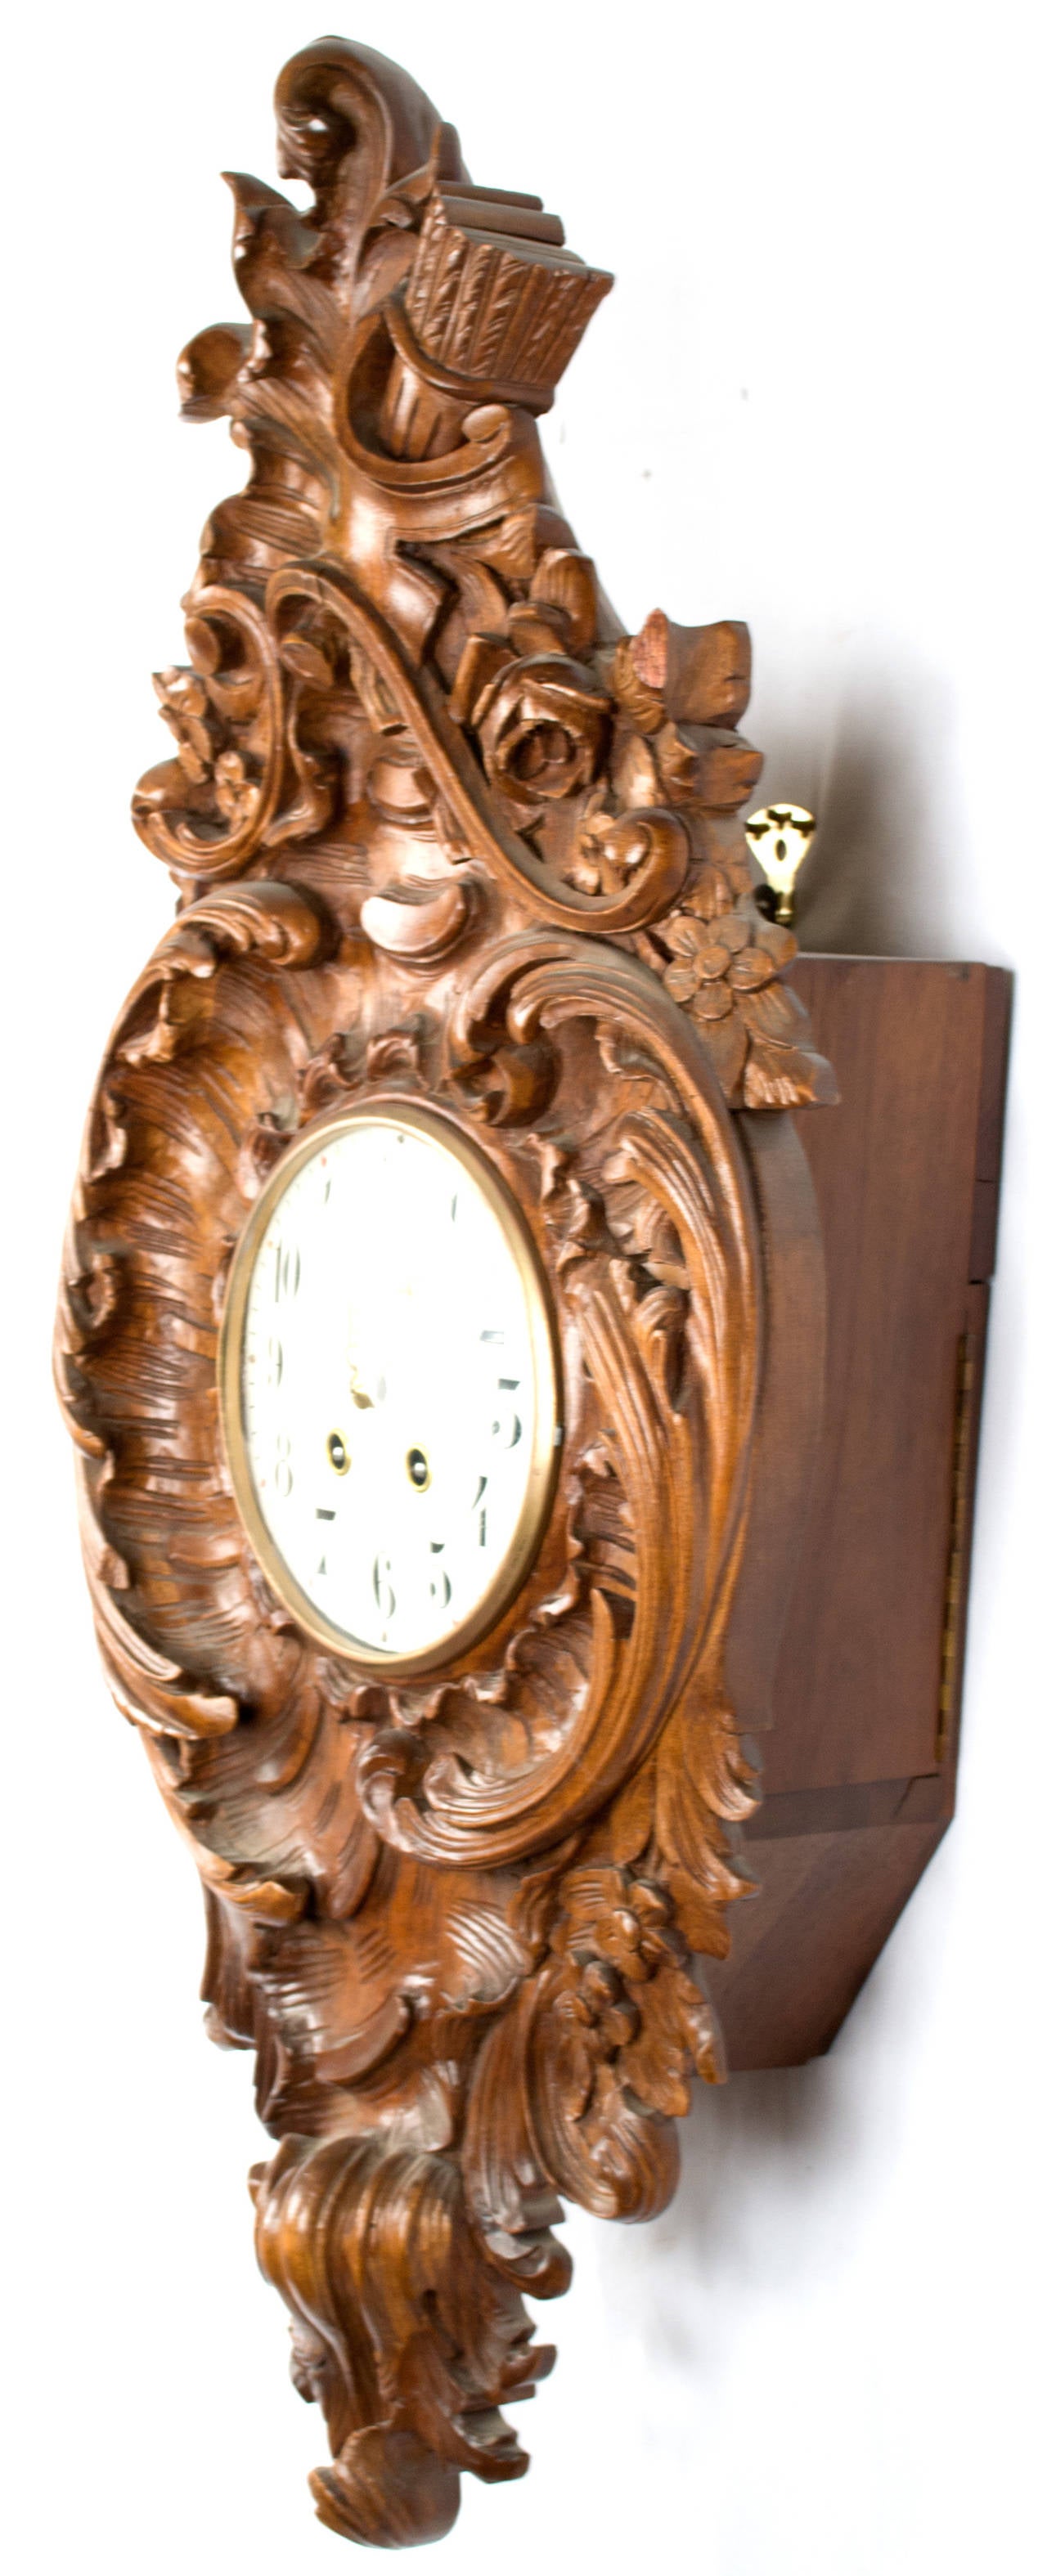 A finely carved Rocaille (i.e. Rococo) style walnut clock with asymmetrical acanthus leaves in C and S scrolls, topped with a roses, and arrows.